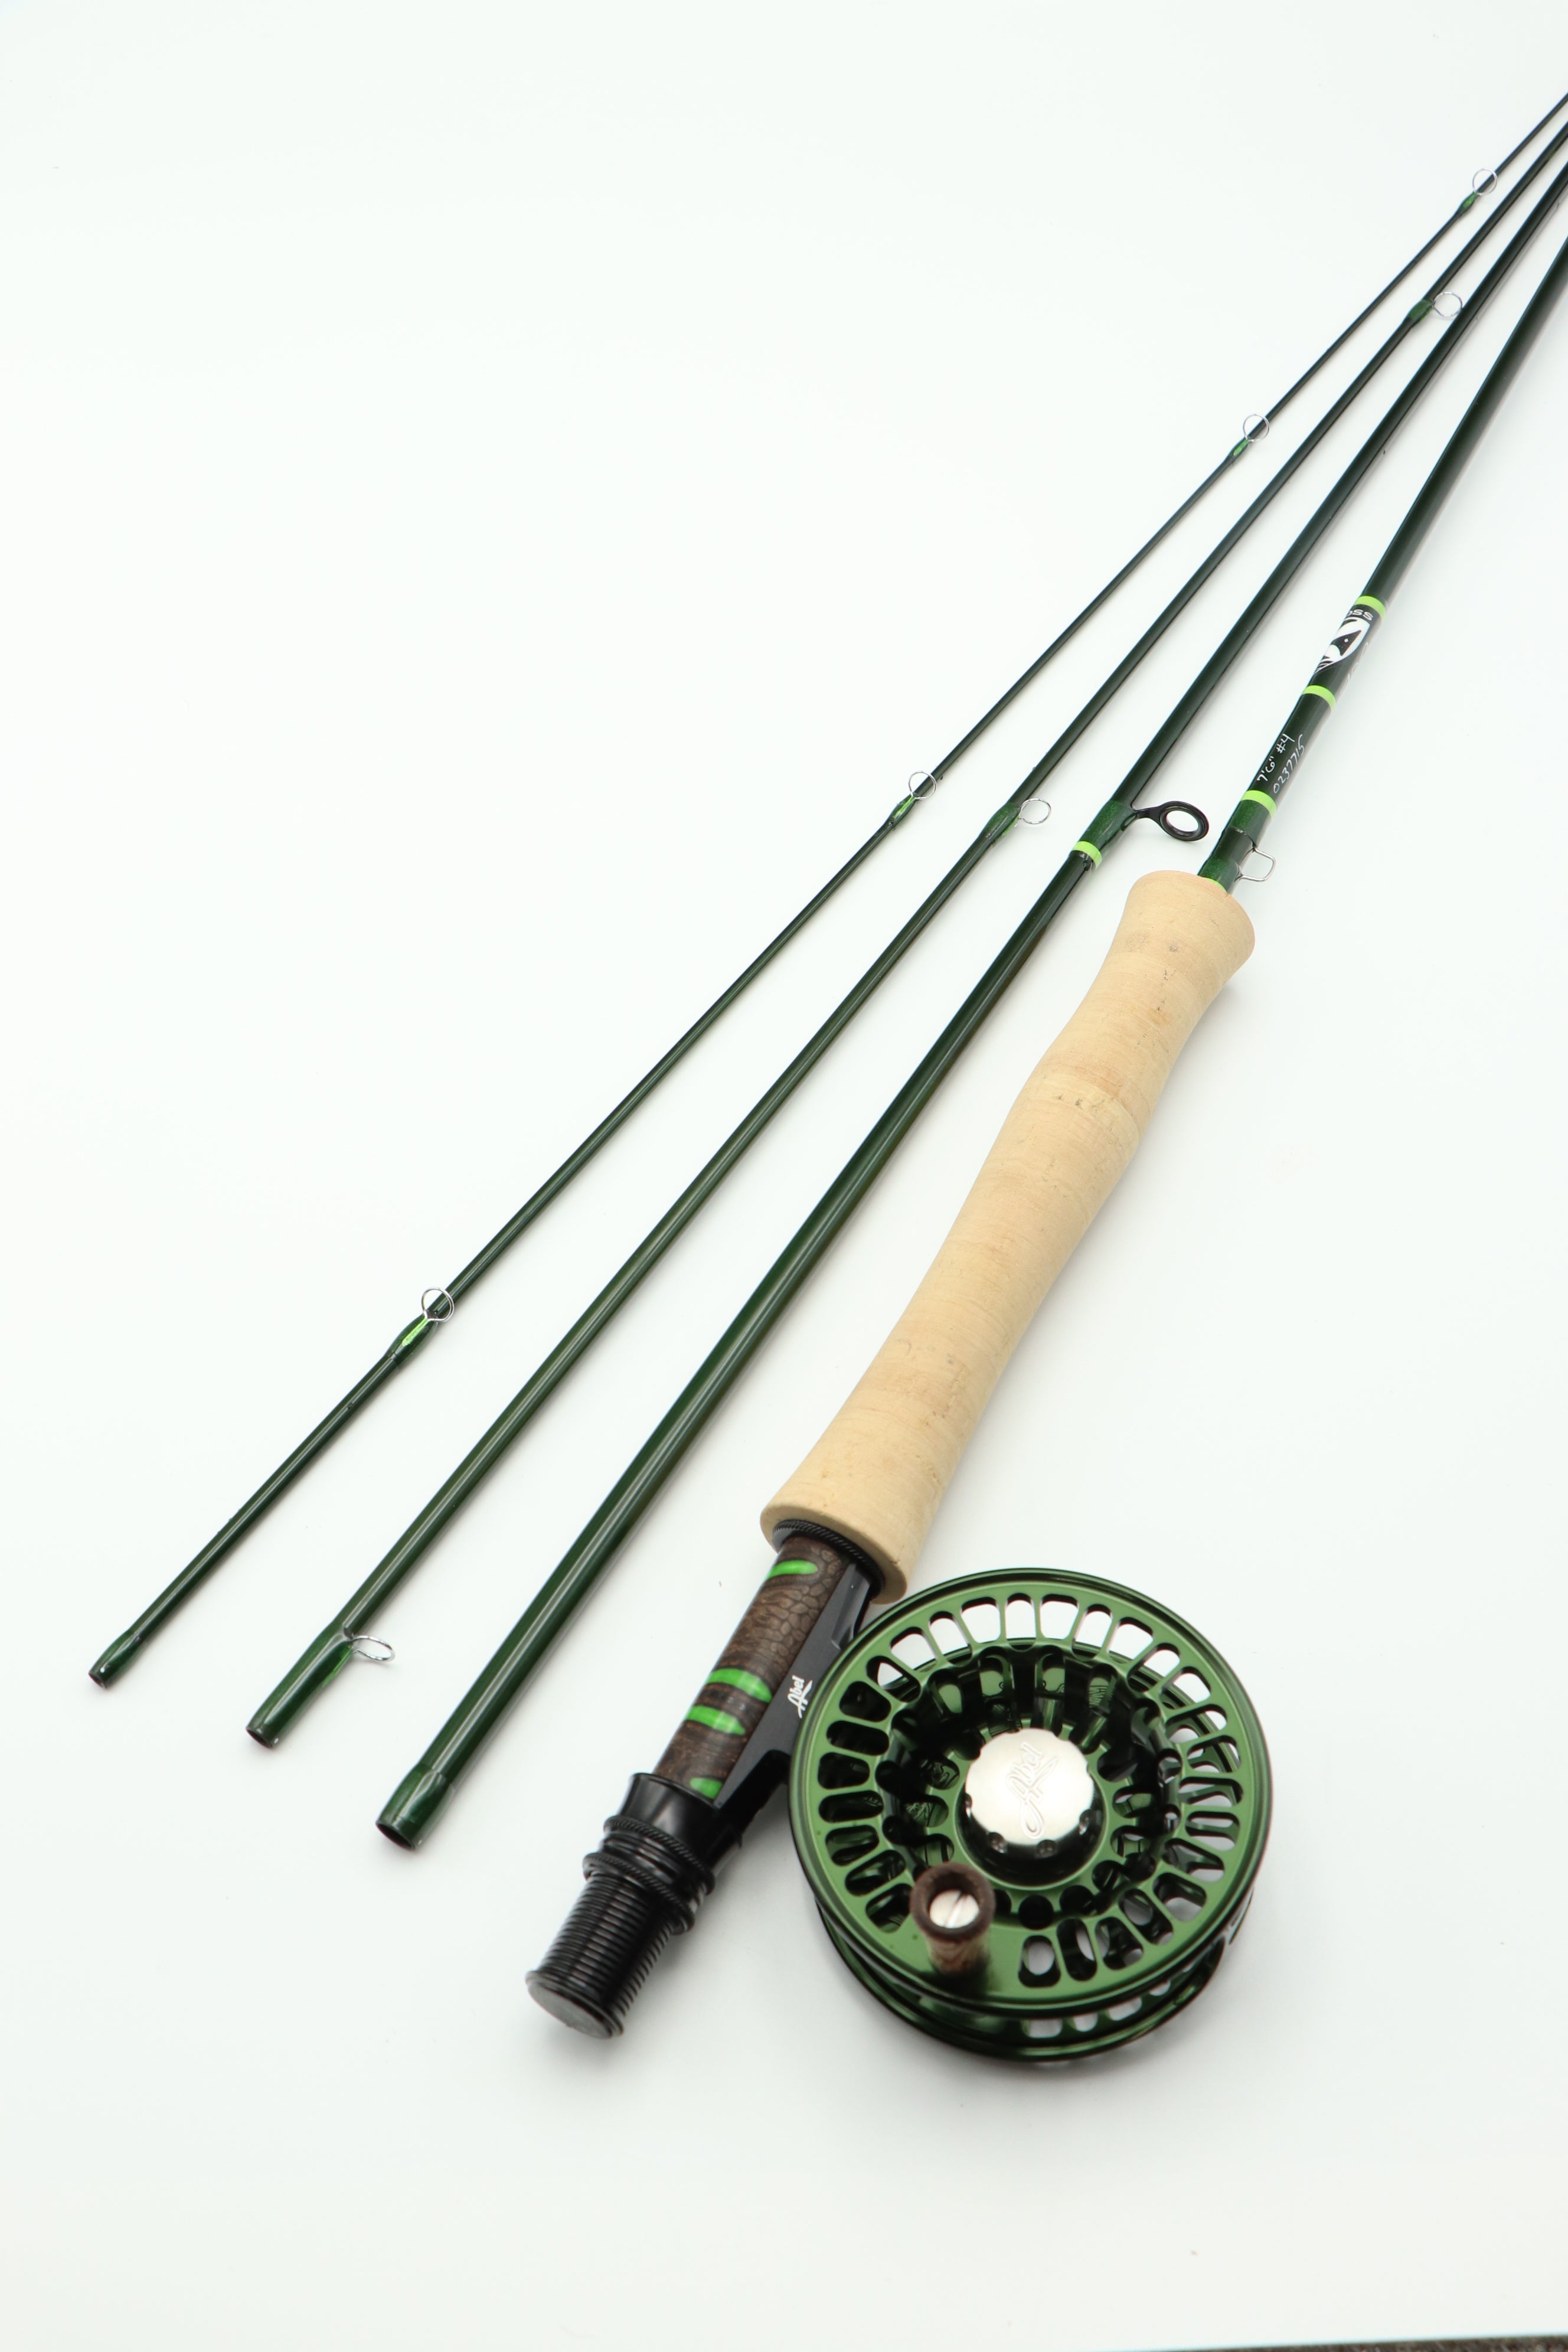 Coherence 7 foot 6 inch 4 weight 4 piece combo – JP Ross Fly Rods